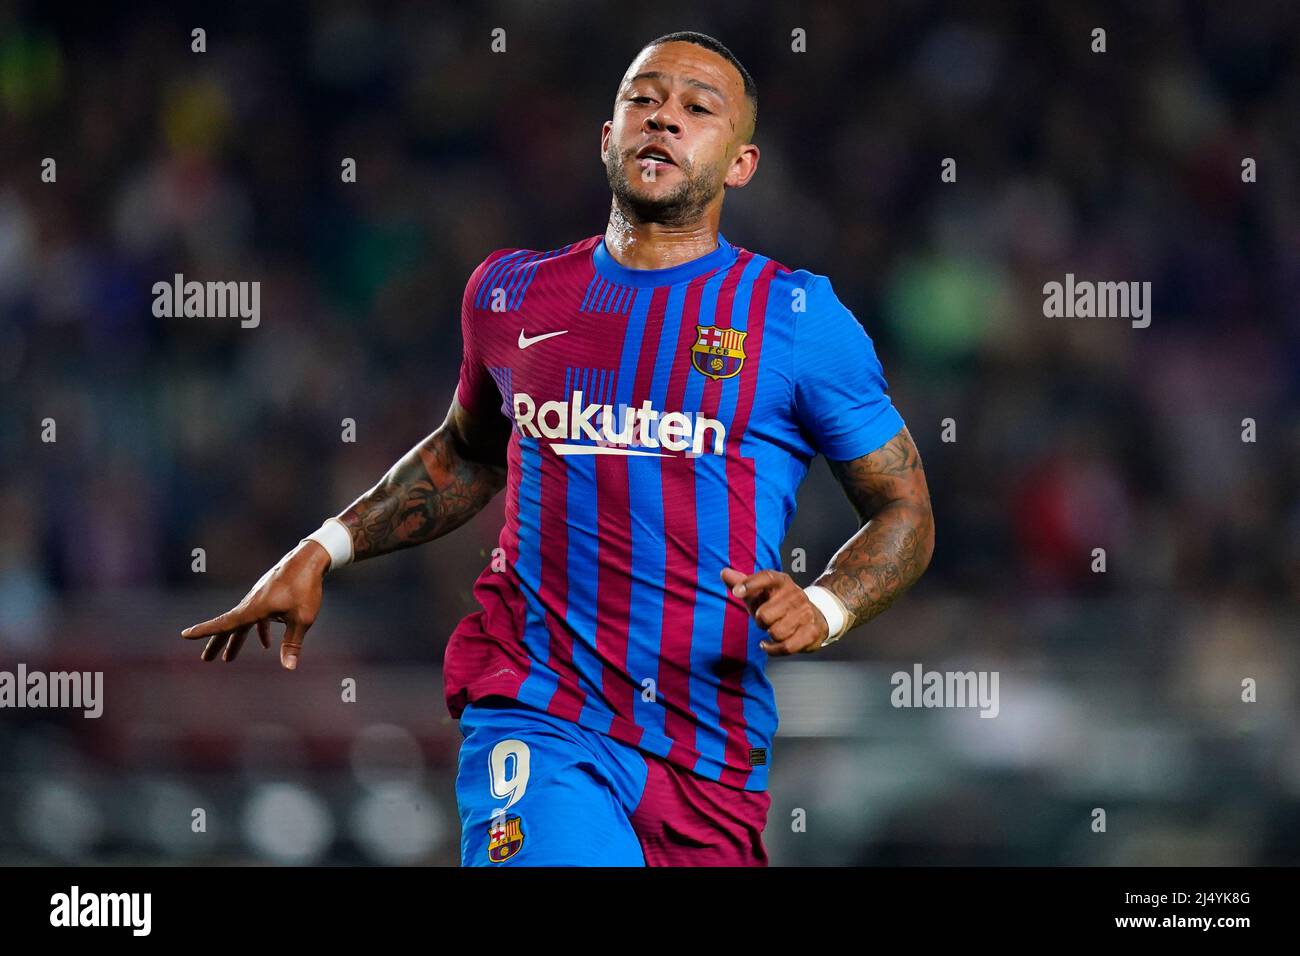 Memphis Depay of FC Barcelona during the La Liga match between FC Barcelona and Cadiz CF played at Camp Nou Stadium on April 18, 2022 in Barcelona, Spain. (Photo by Sergio Ruiz / PRESSINPHOTO) Stock Photo